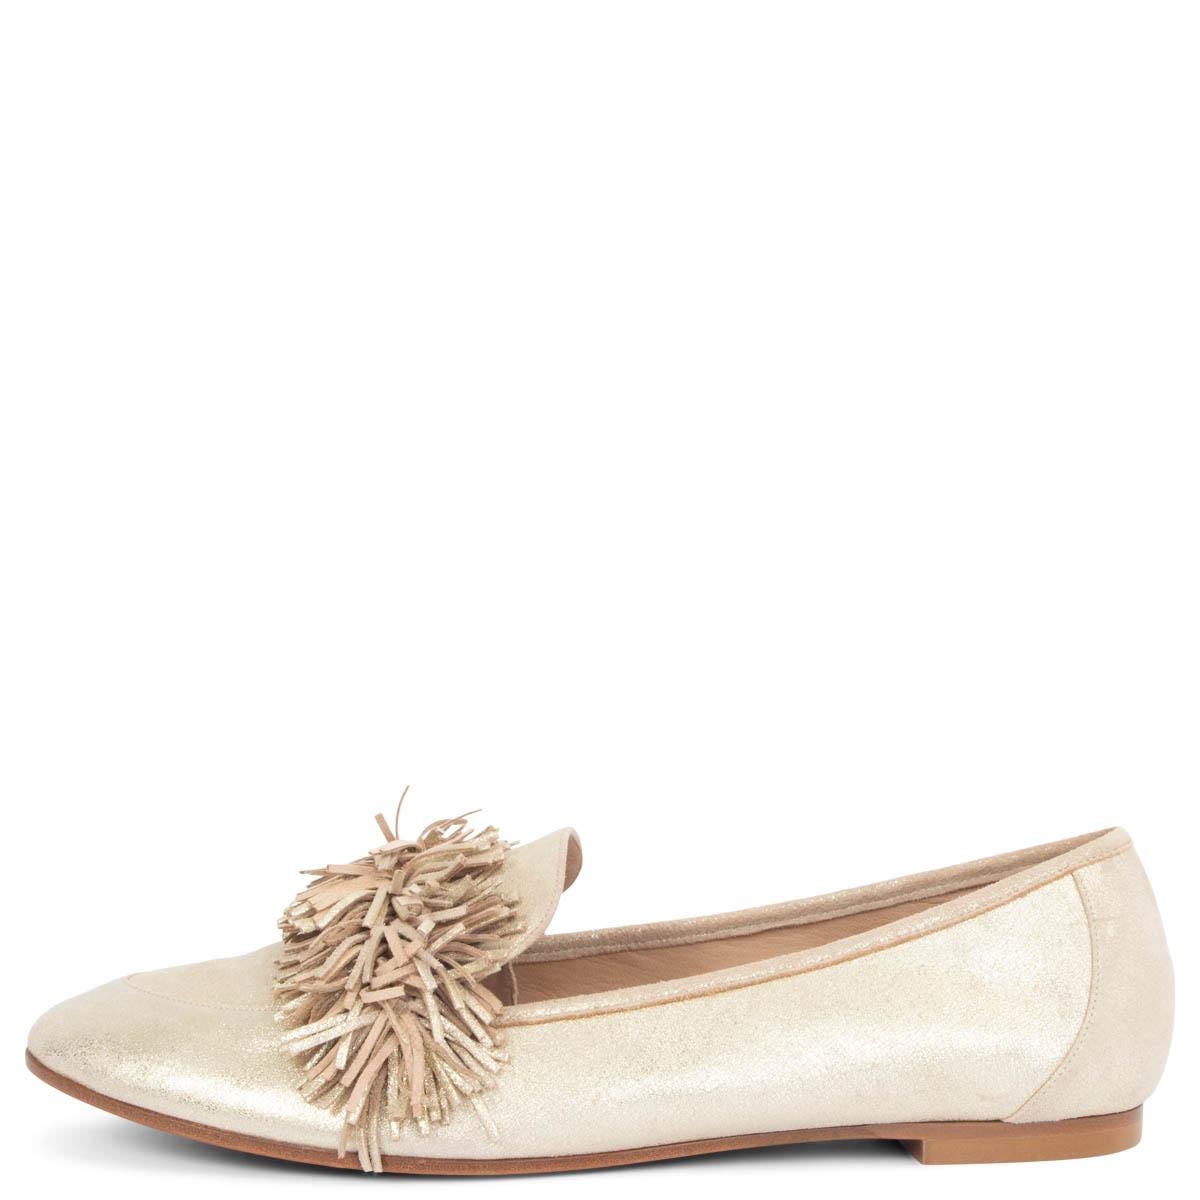 Gold AQUAZZURA light gold suede WILD THING Loafers Flats Shoes 40 For Sale